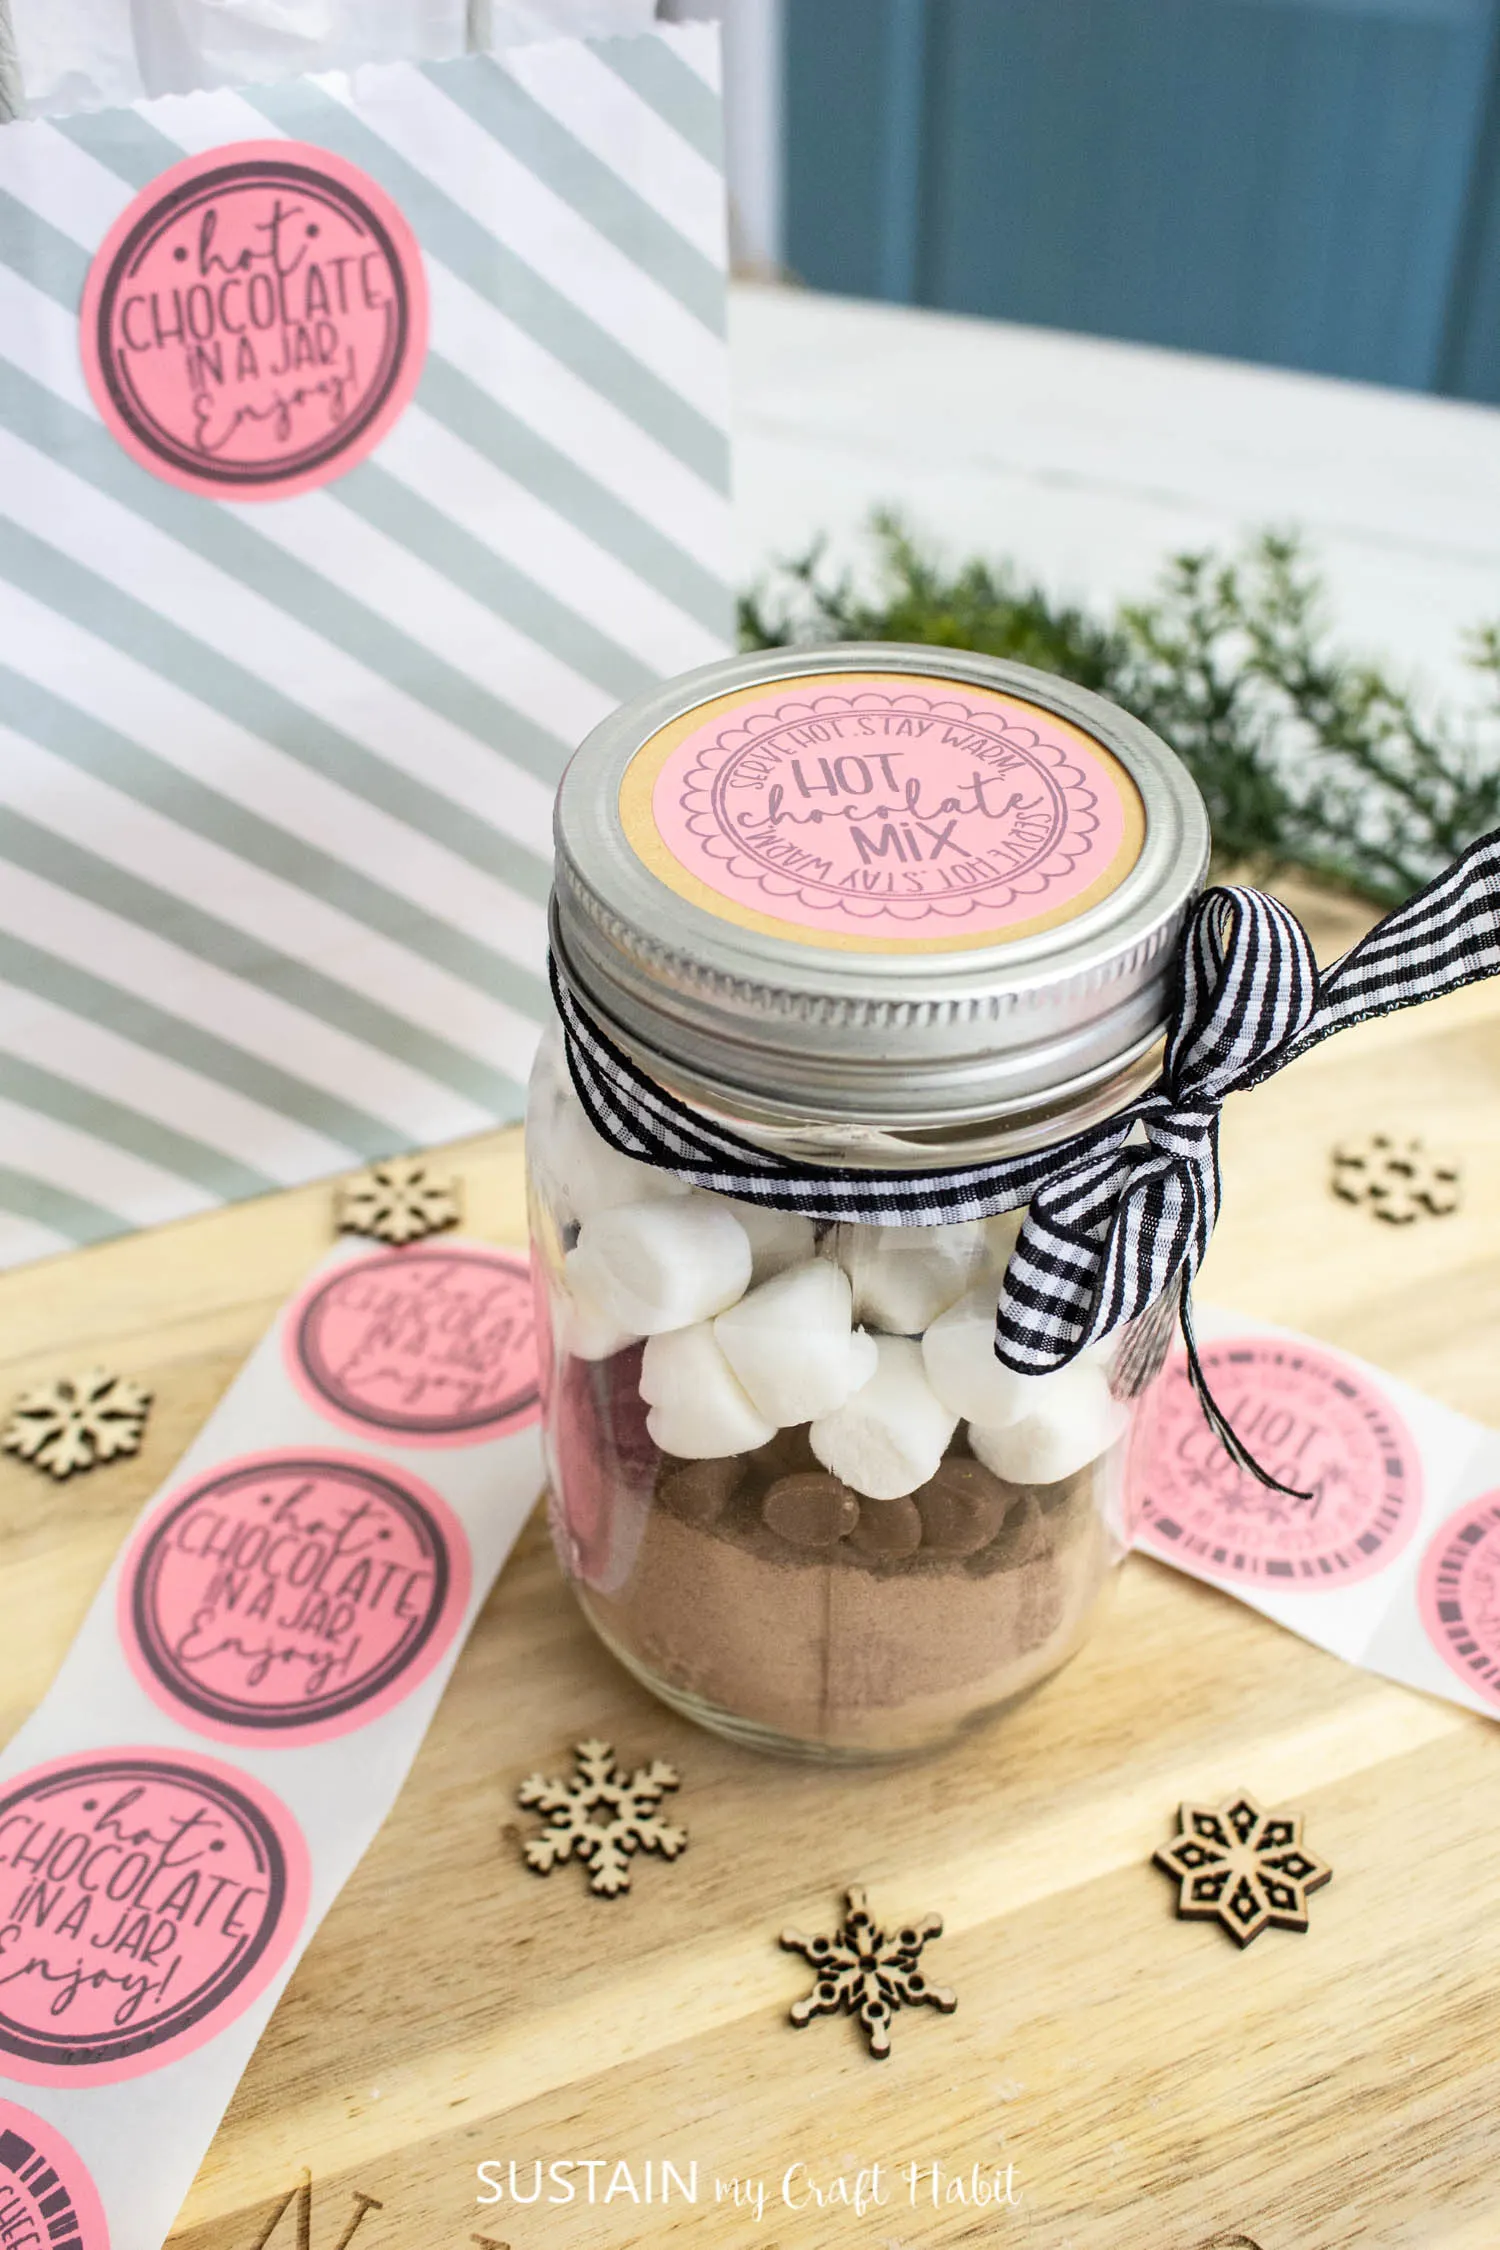 https://sustainmycrafthabit.com/wp-content/uploads/2023/10/Christmas-Hot-Chocolate-Labels-with-Munbyn-16.jpg.webp